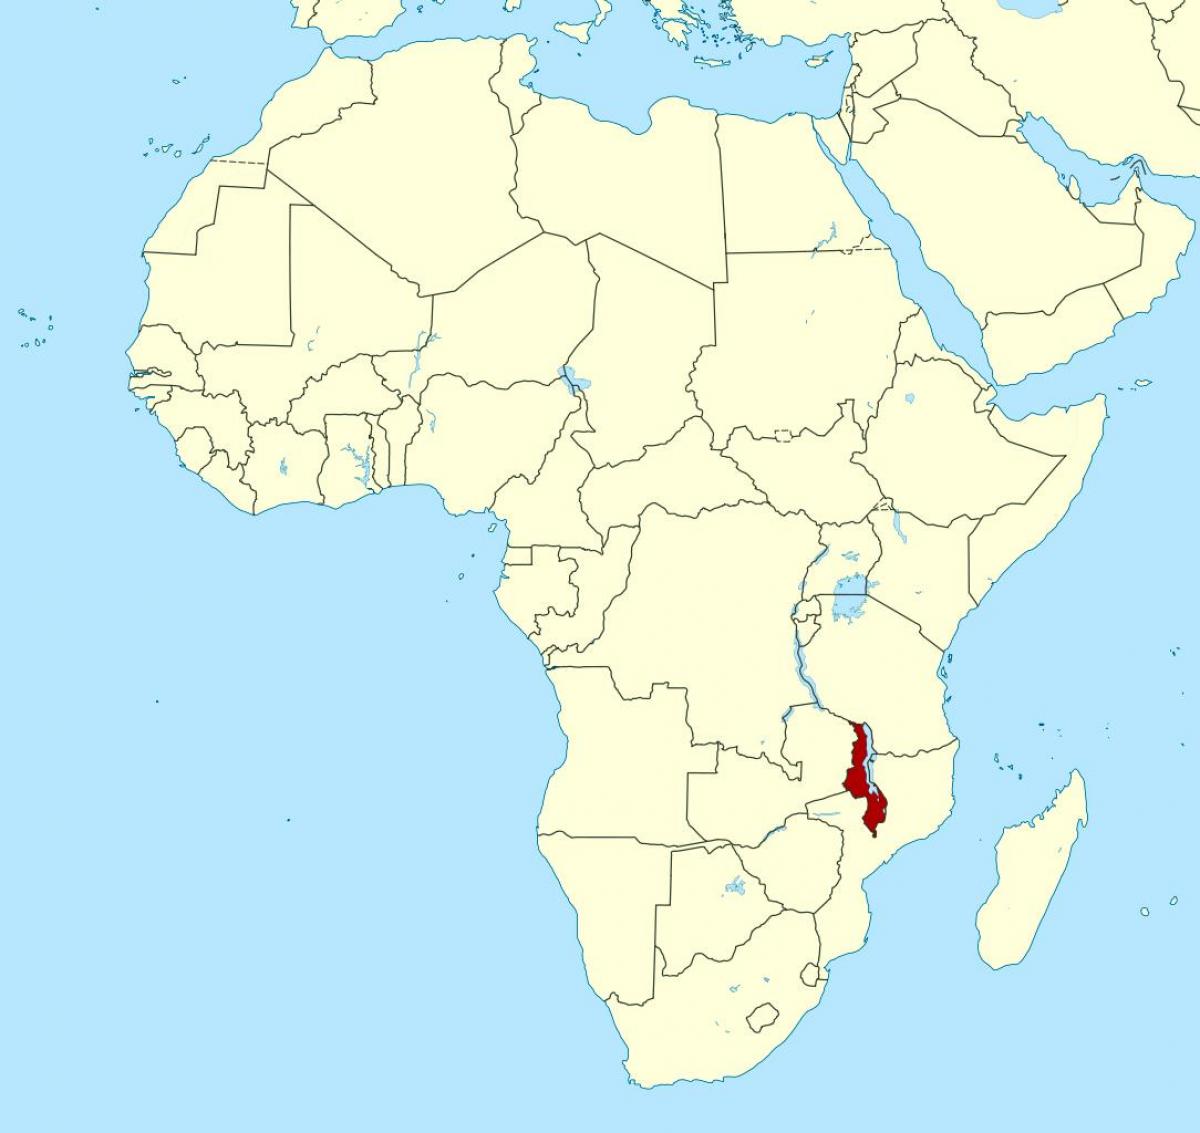 map of Malawi location map africa